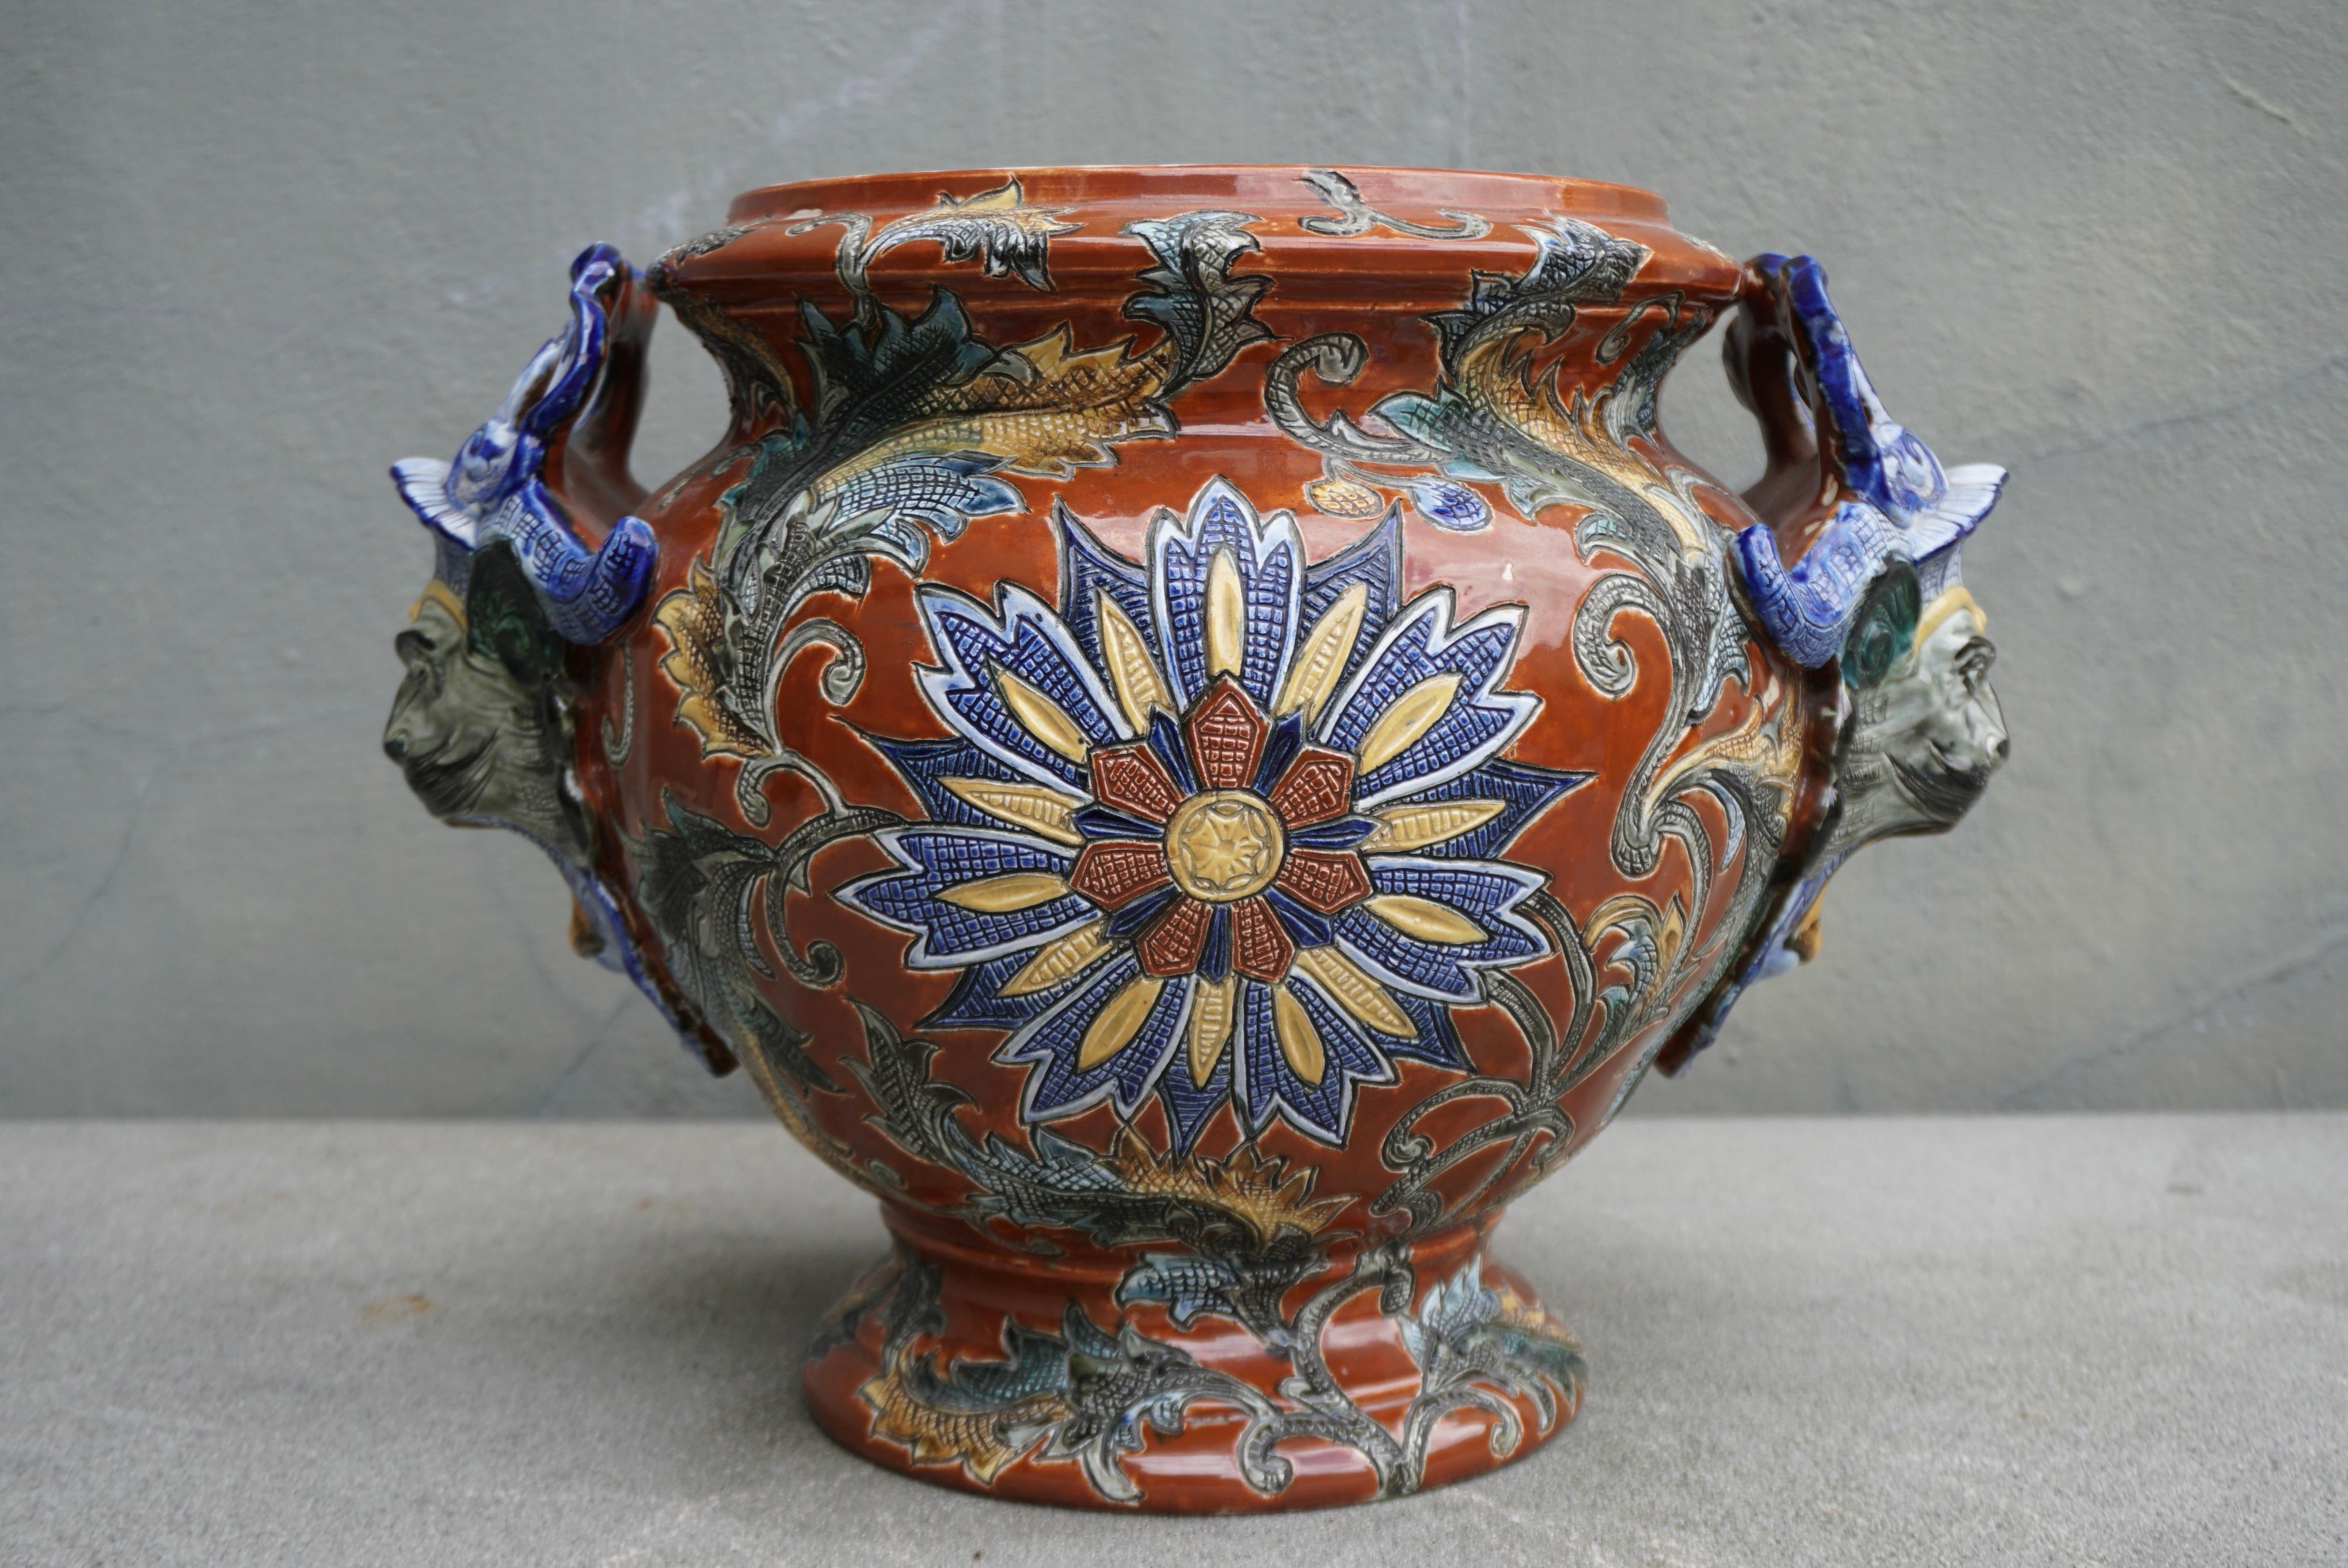 This round and colorful antique planter, flower pot was created in France, circa 1890. The elegant porcelain piece is in excellent condition with rich painted colors in the blue, brown and yellow. 

Height 12.9